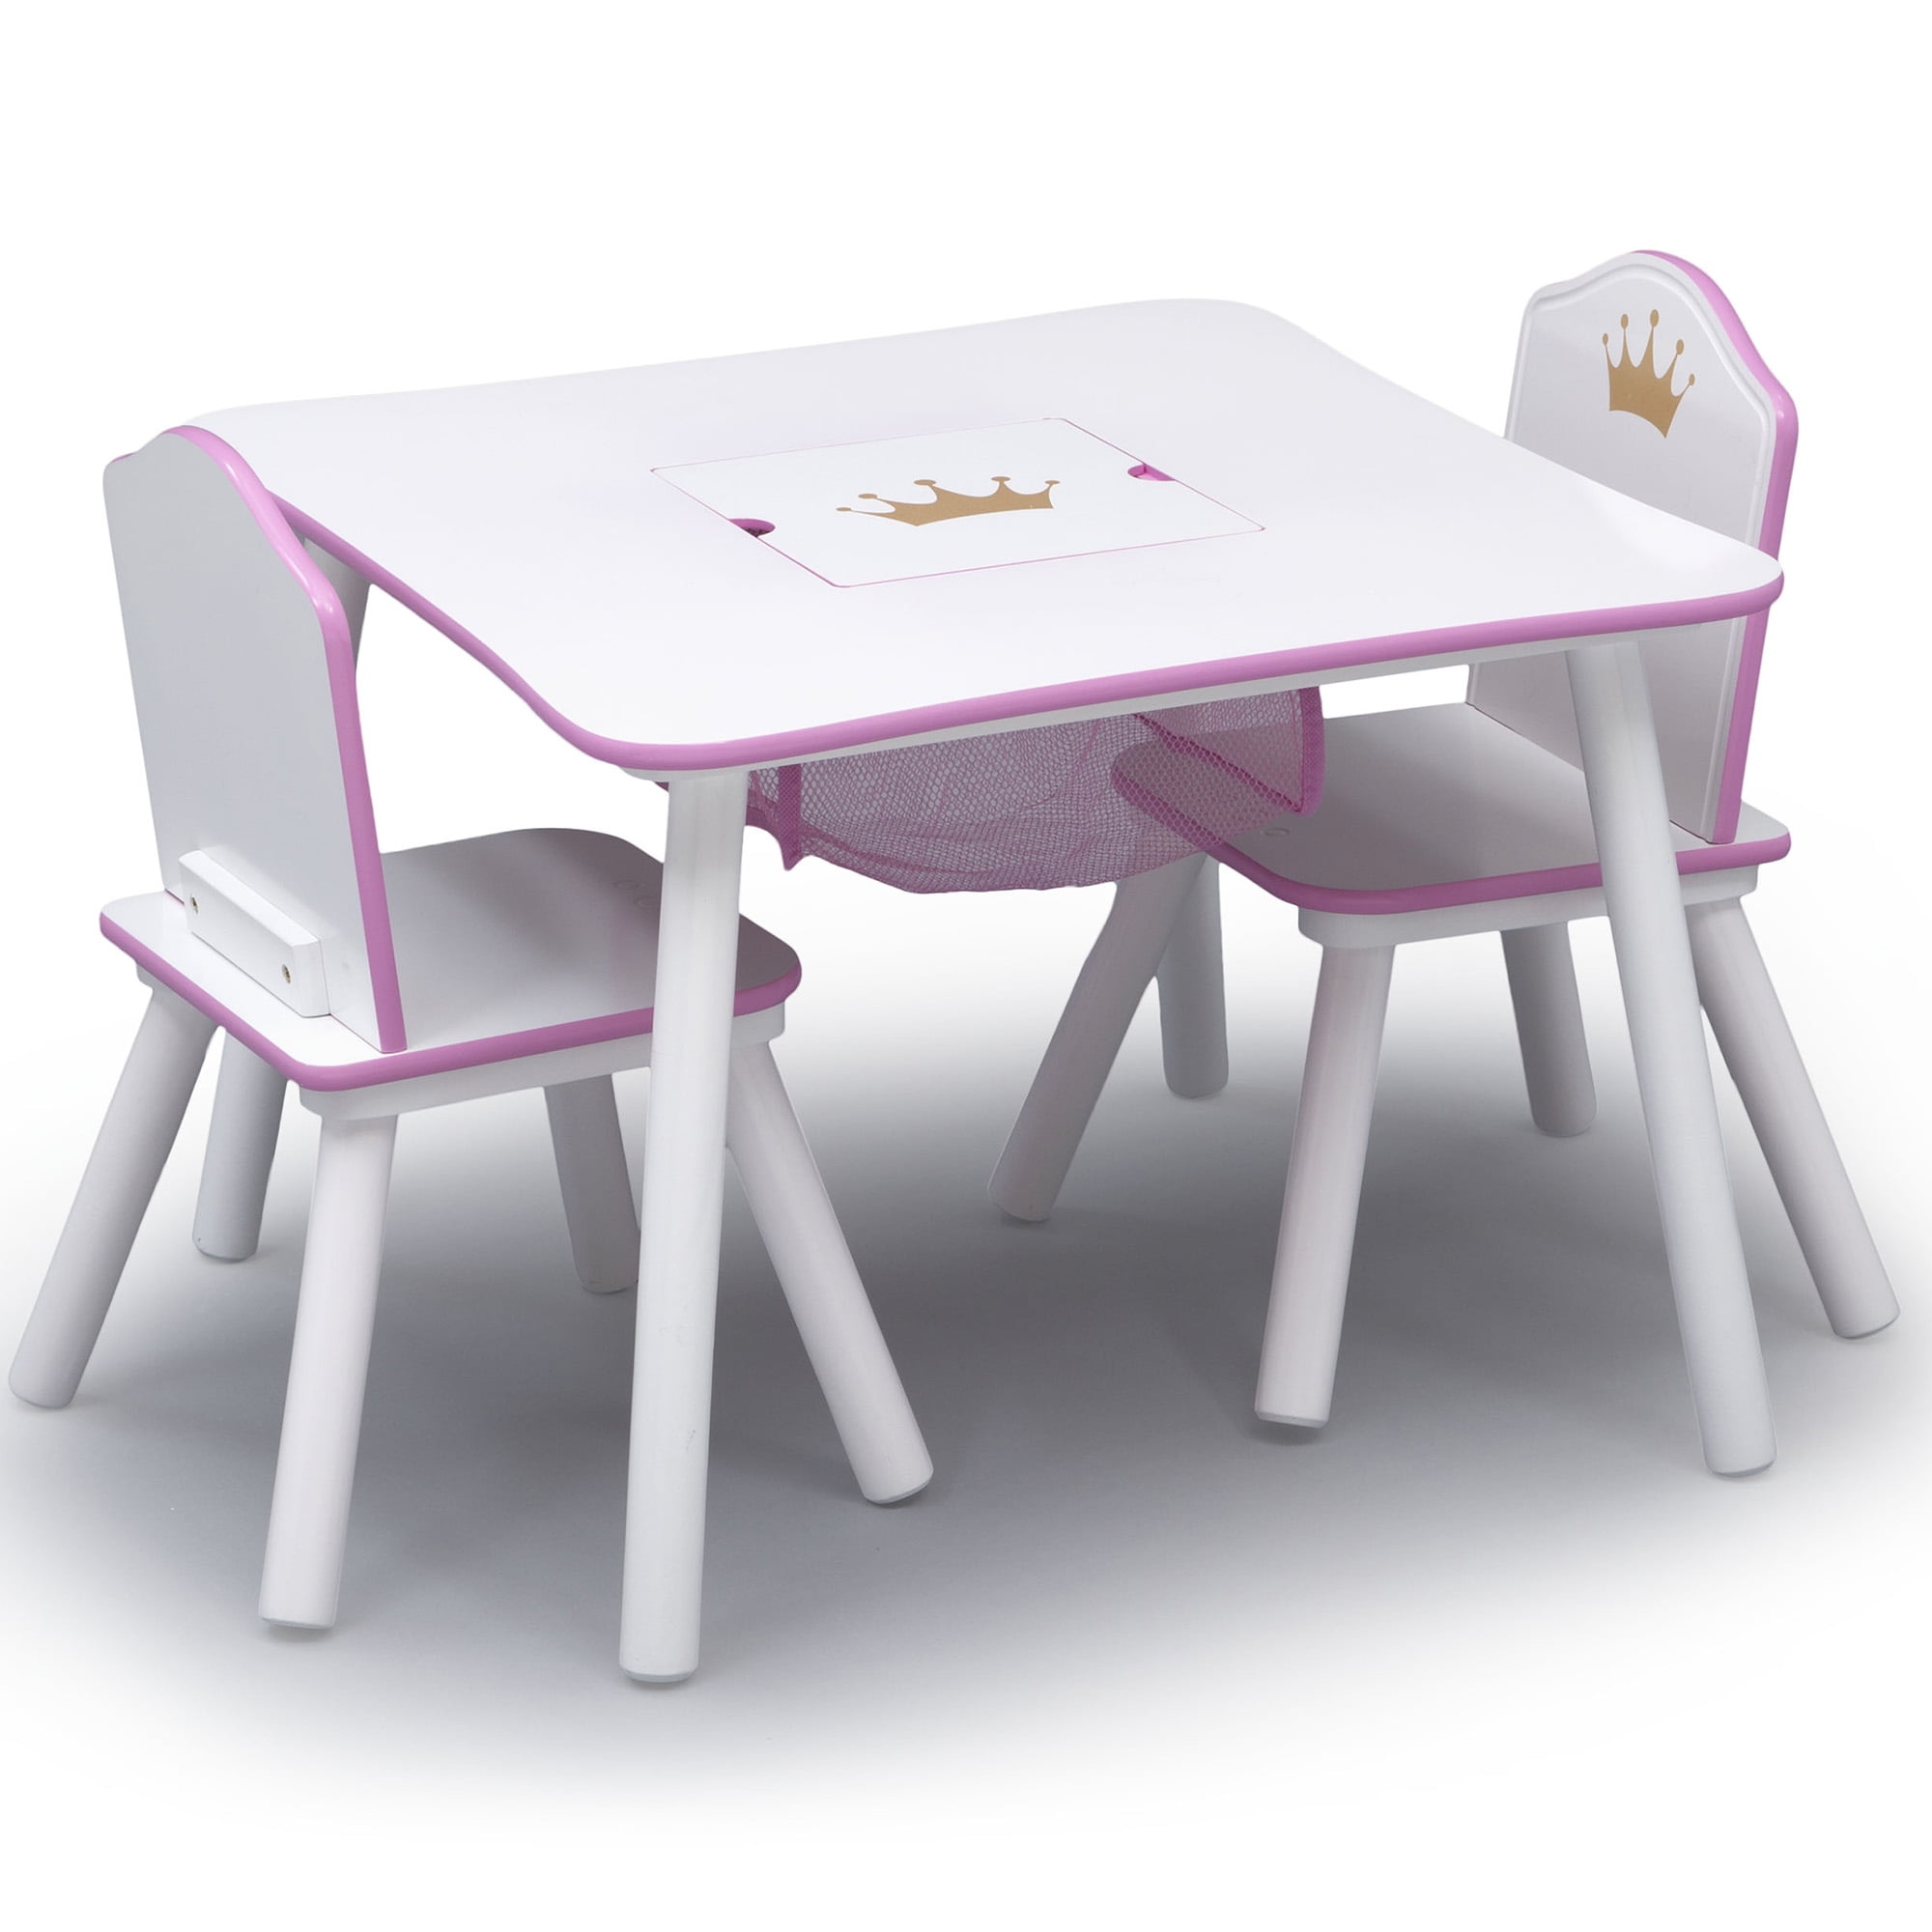 Delta Children Kids Table and Chair Set with Storage for Toddlers White/Pink